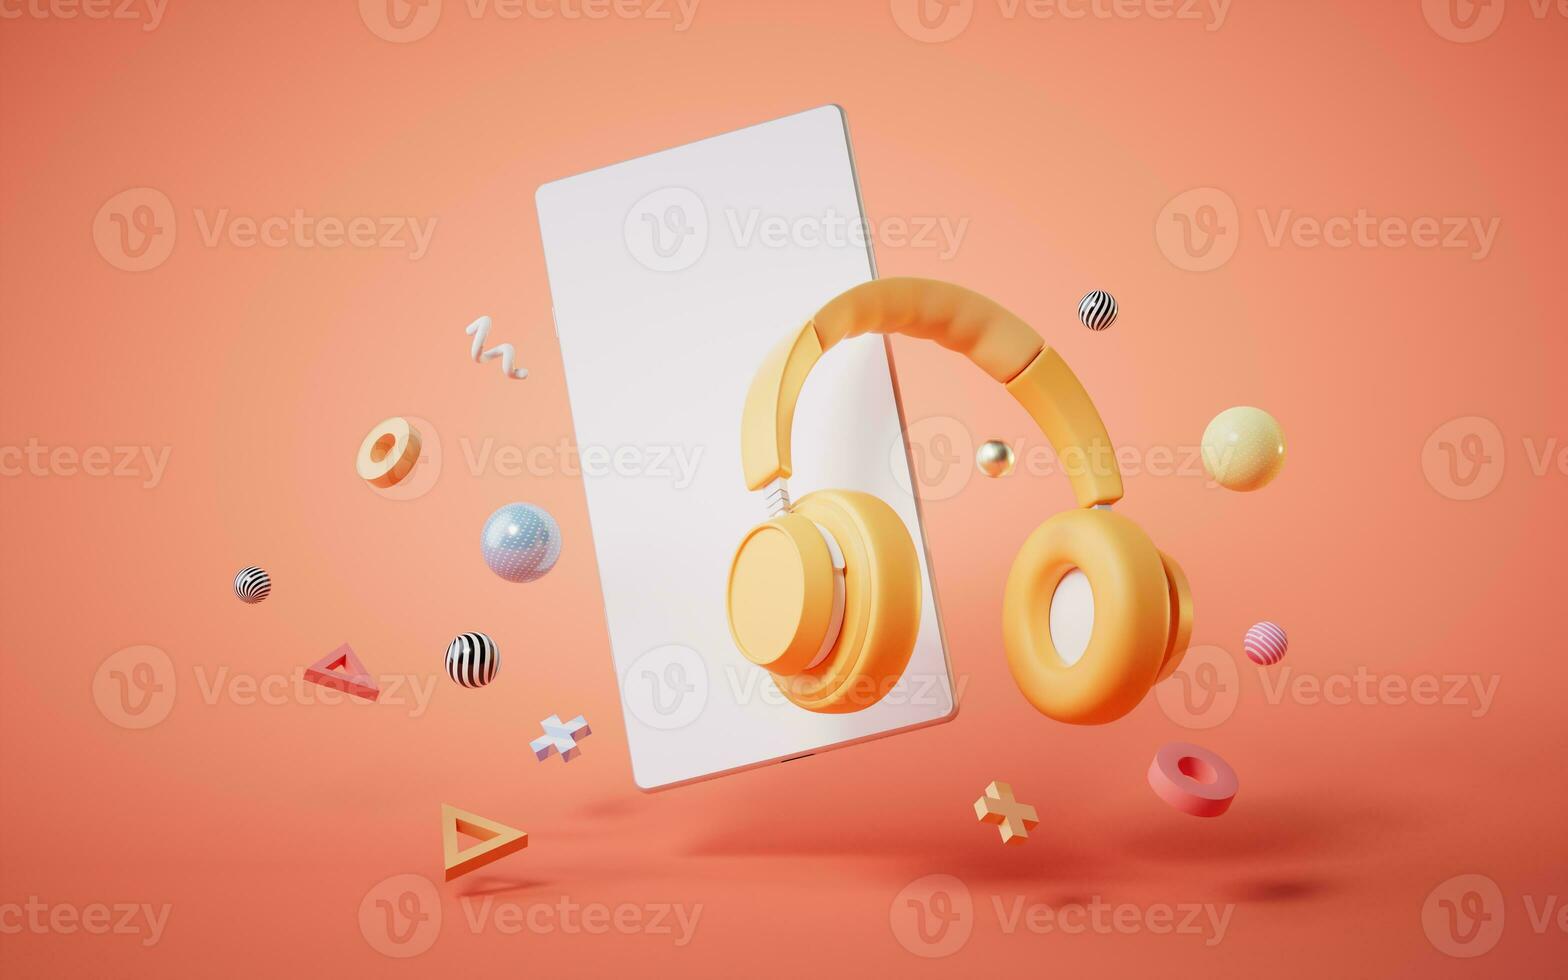 Earphone and mobile phone, 3d rendering. photo